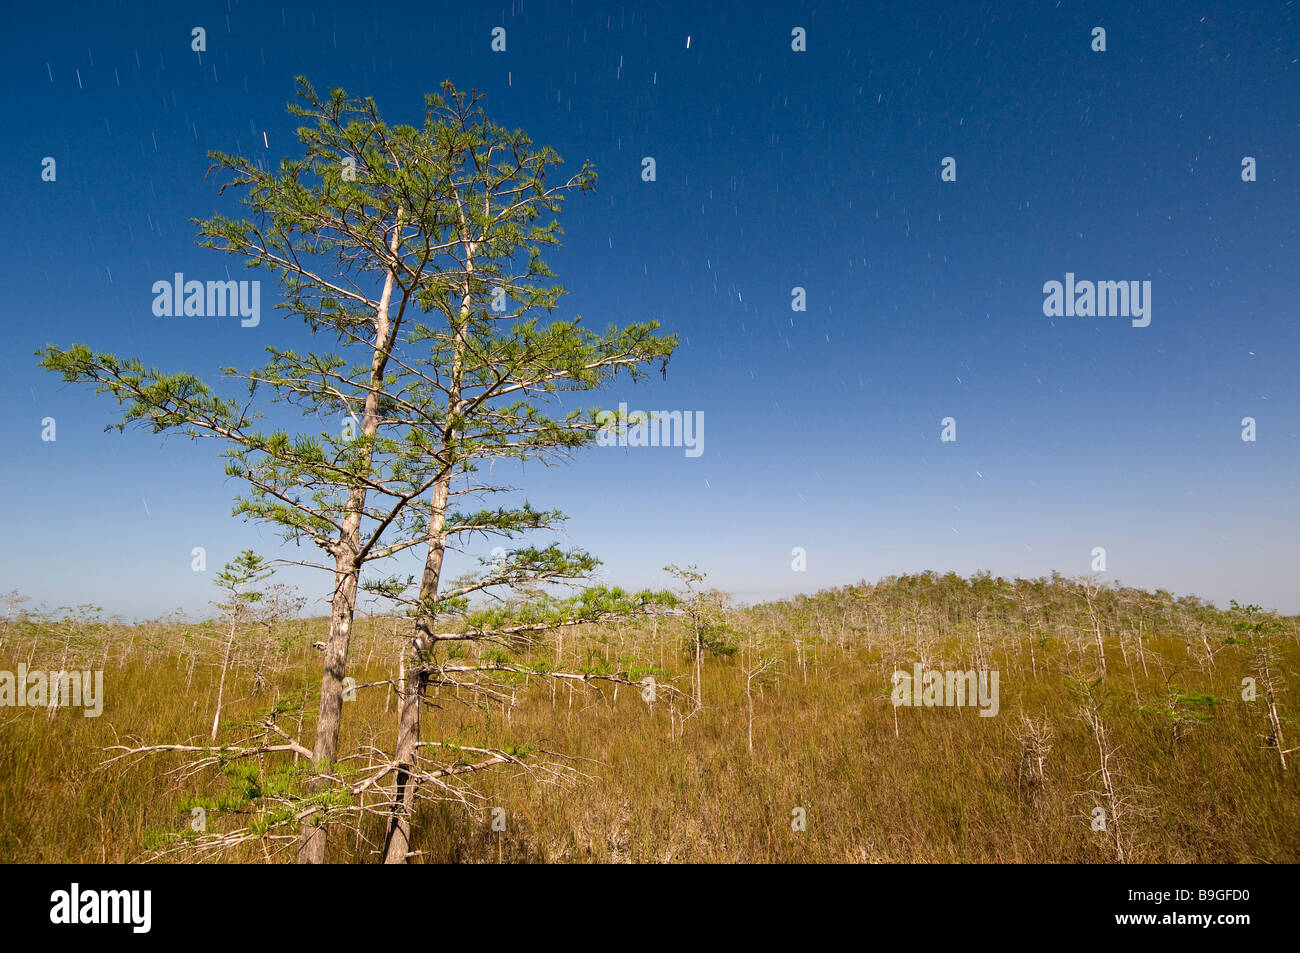 Time exposure under full moon captures star trails and bald cypress forest in sawgrass prairie Everglades National Park Florida Stock Photo